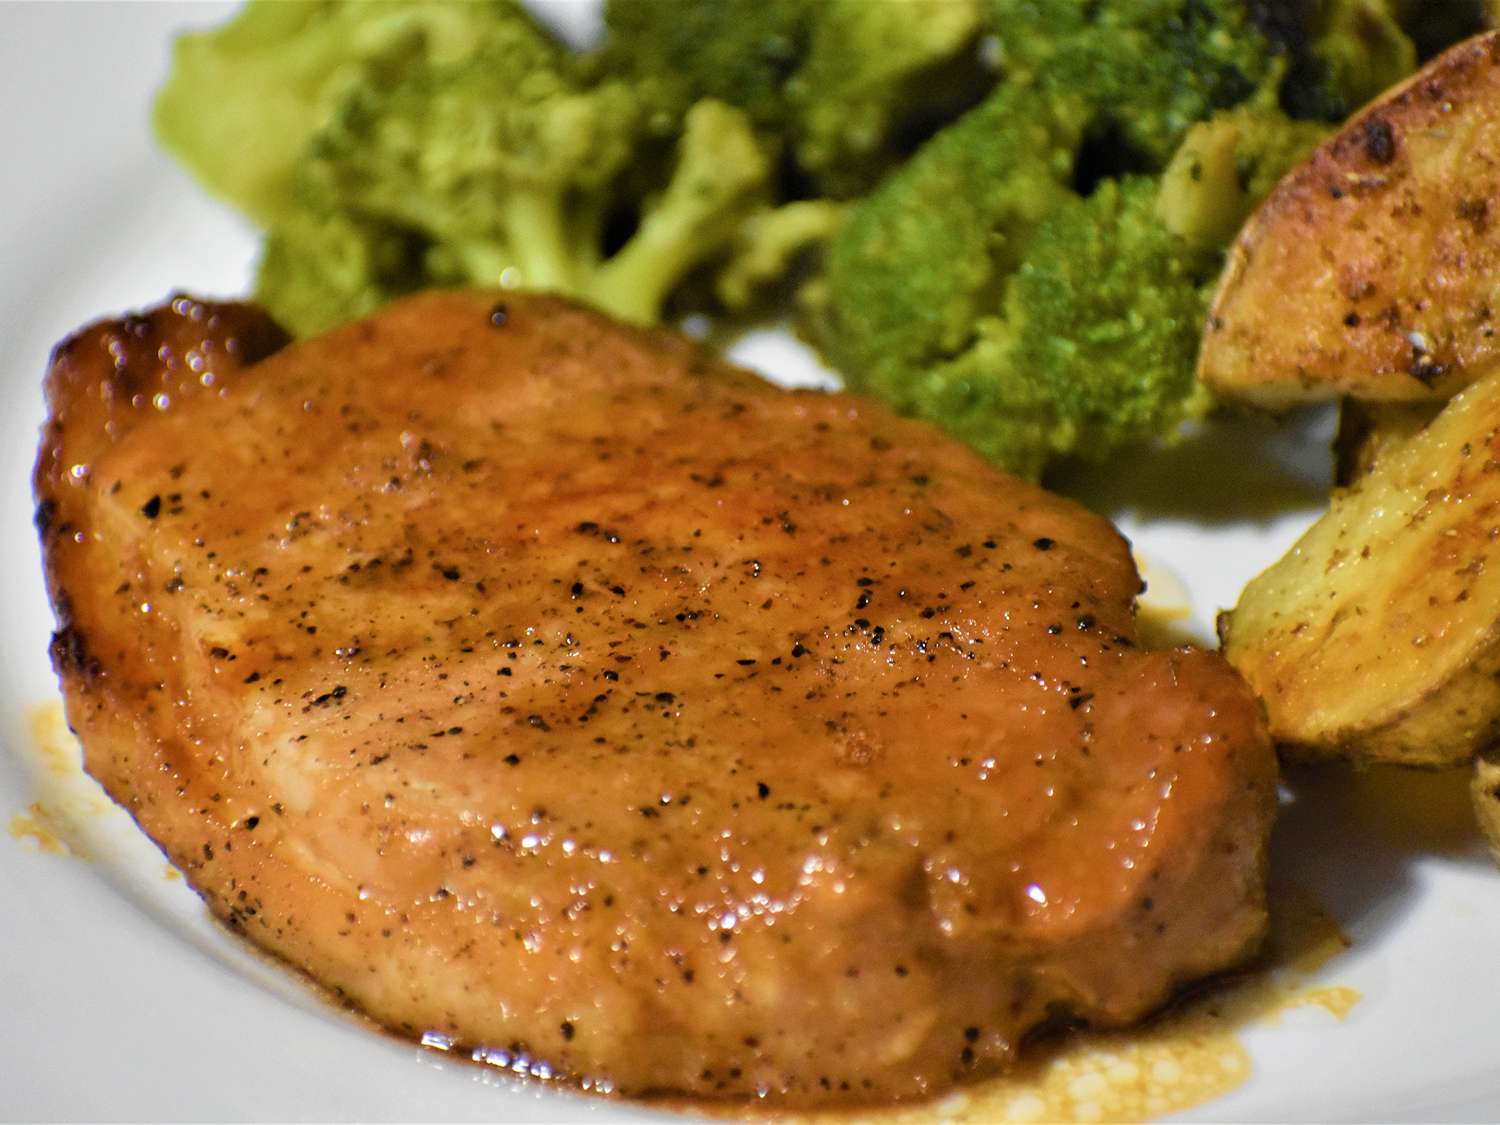 close up view of a Honey-Garlic Pork Chop served with broccoli on a plate